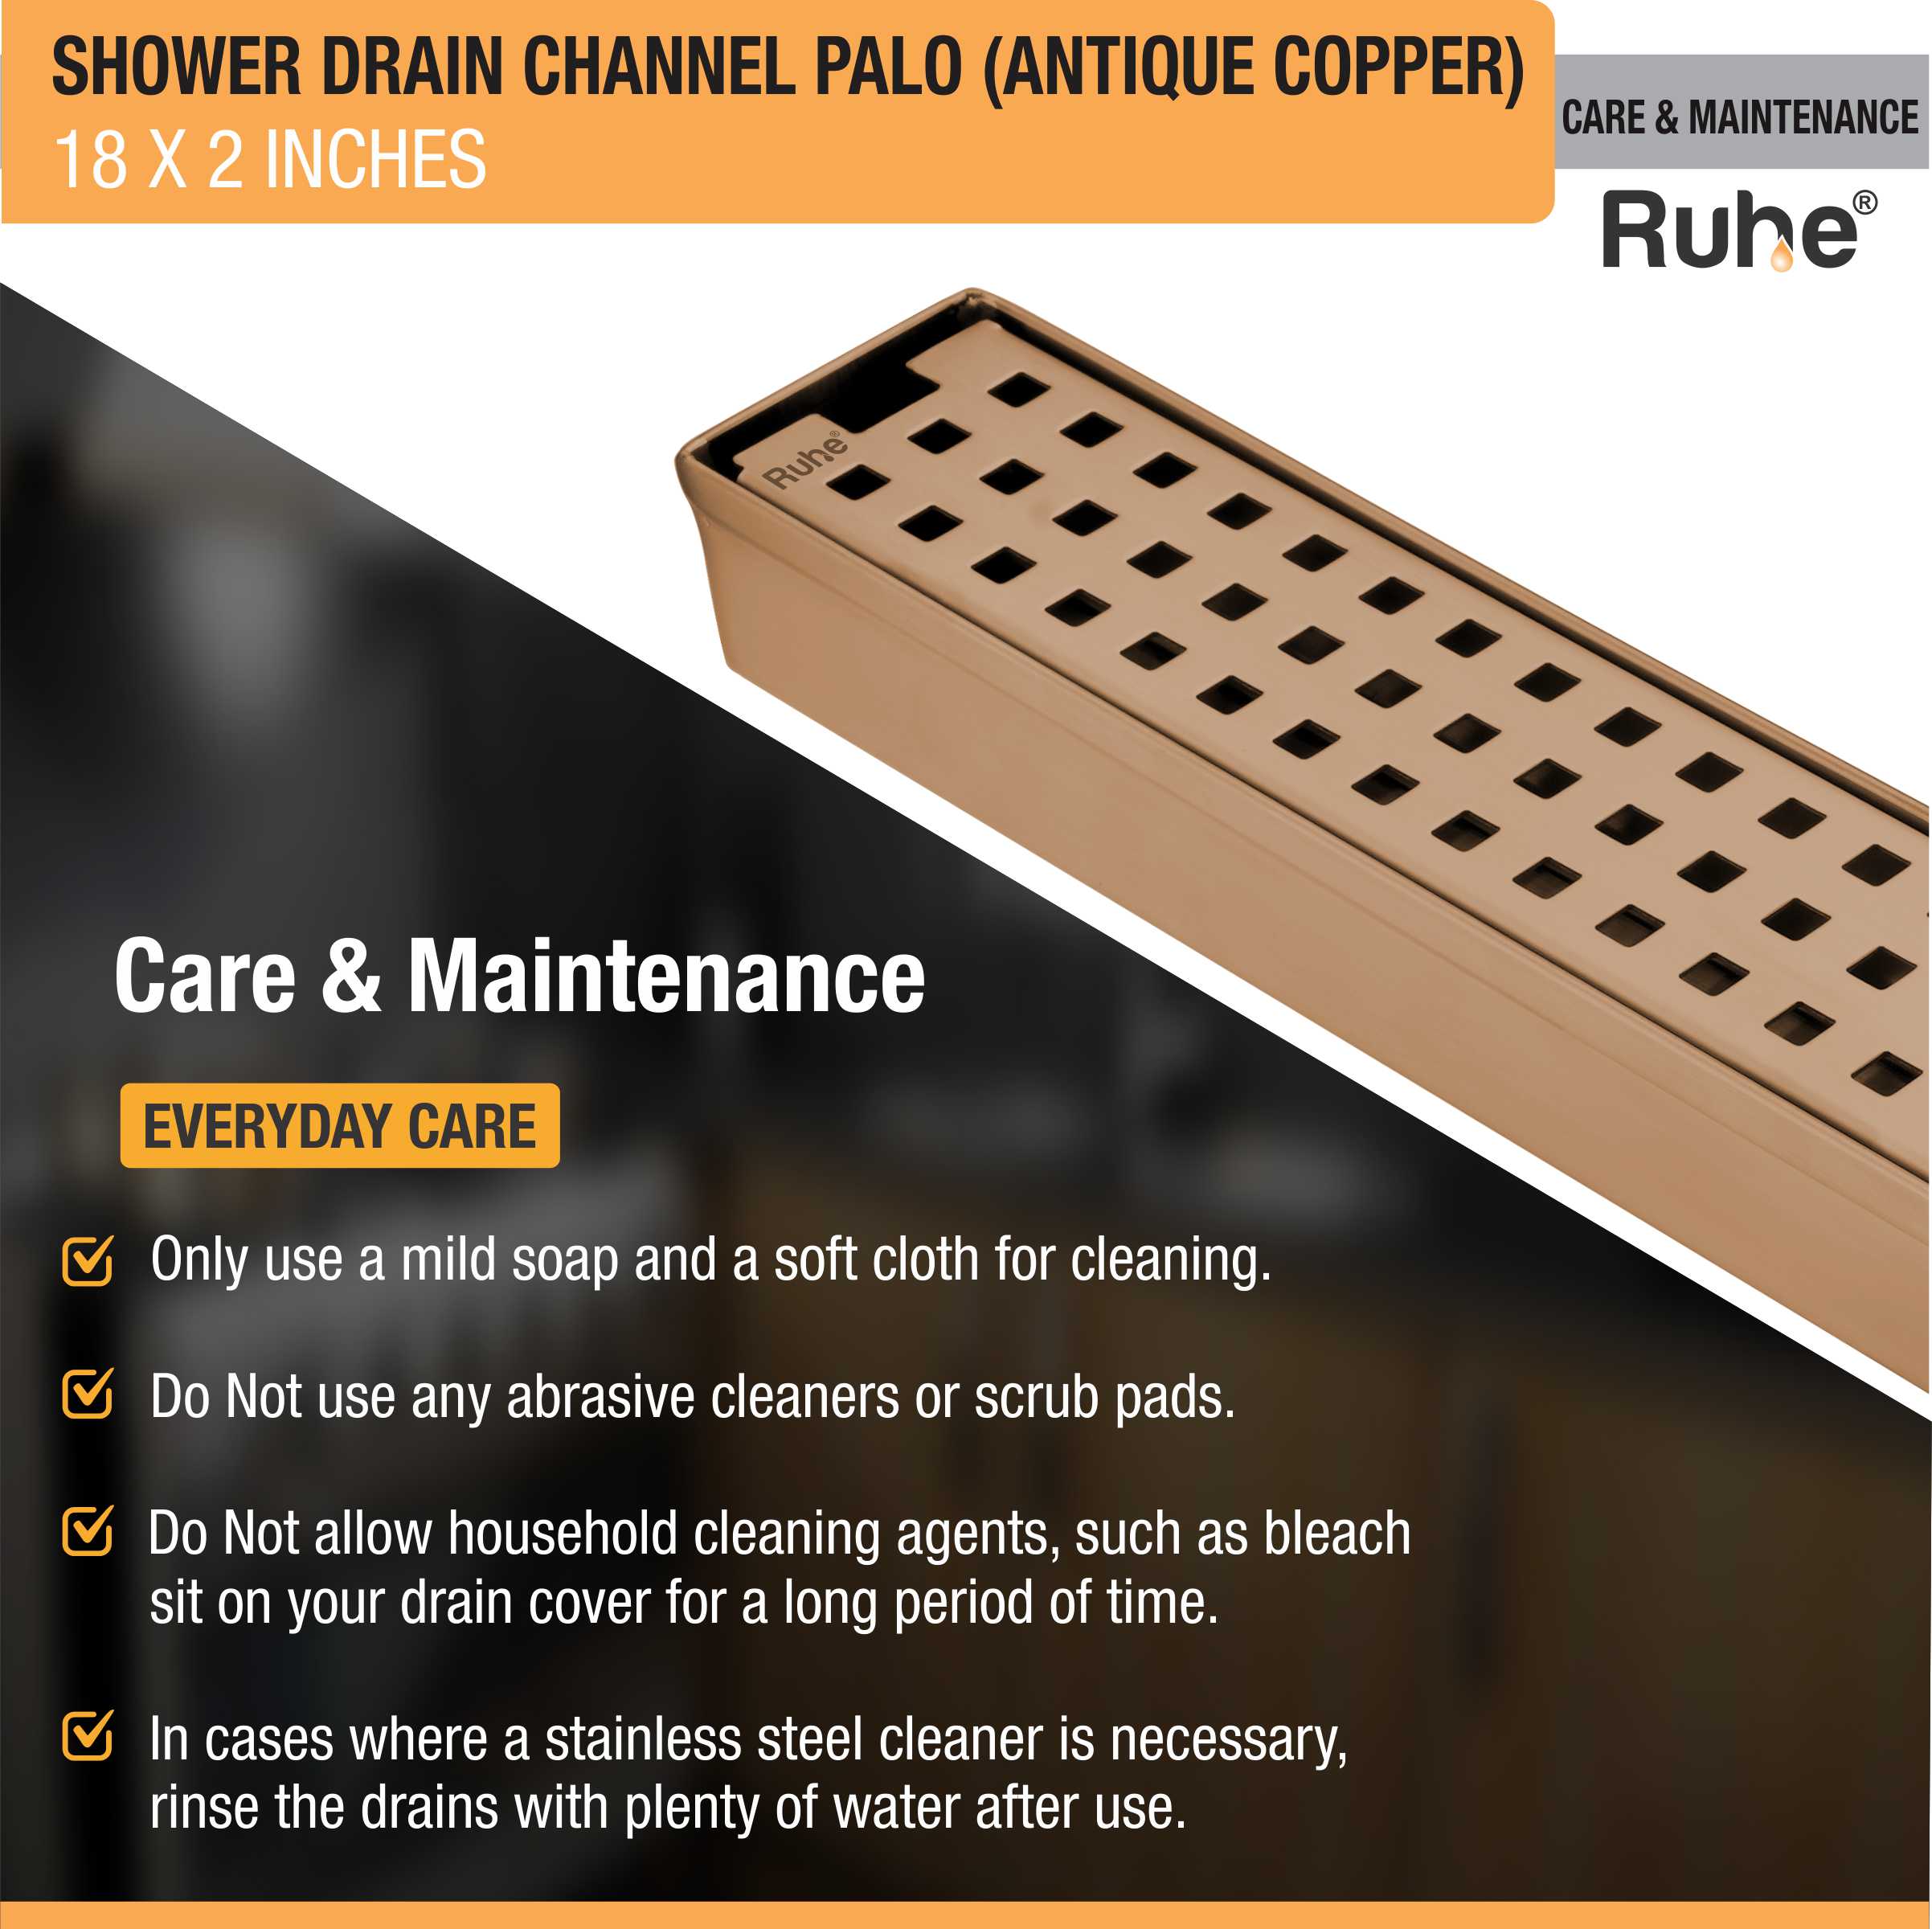 Palo Shower Drain Channel (18 x 2 Inches) ROSE GOLD/ANTIQUE COPPER care and maintenance